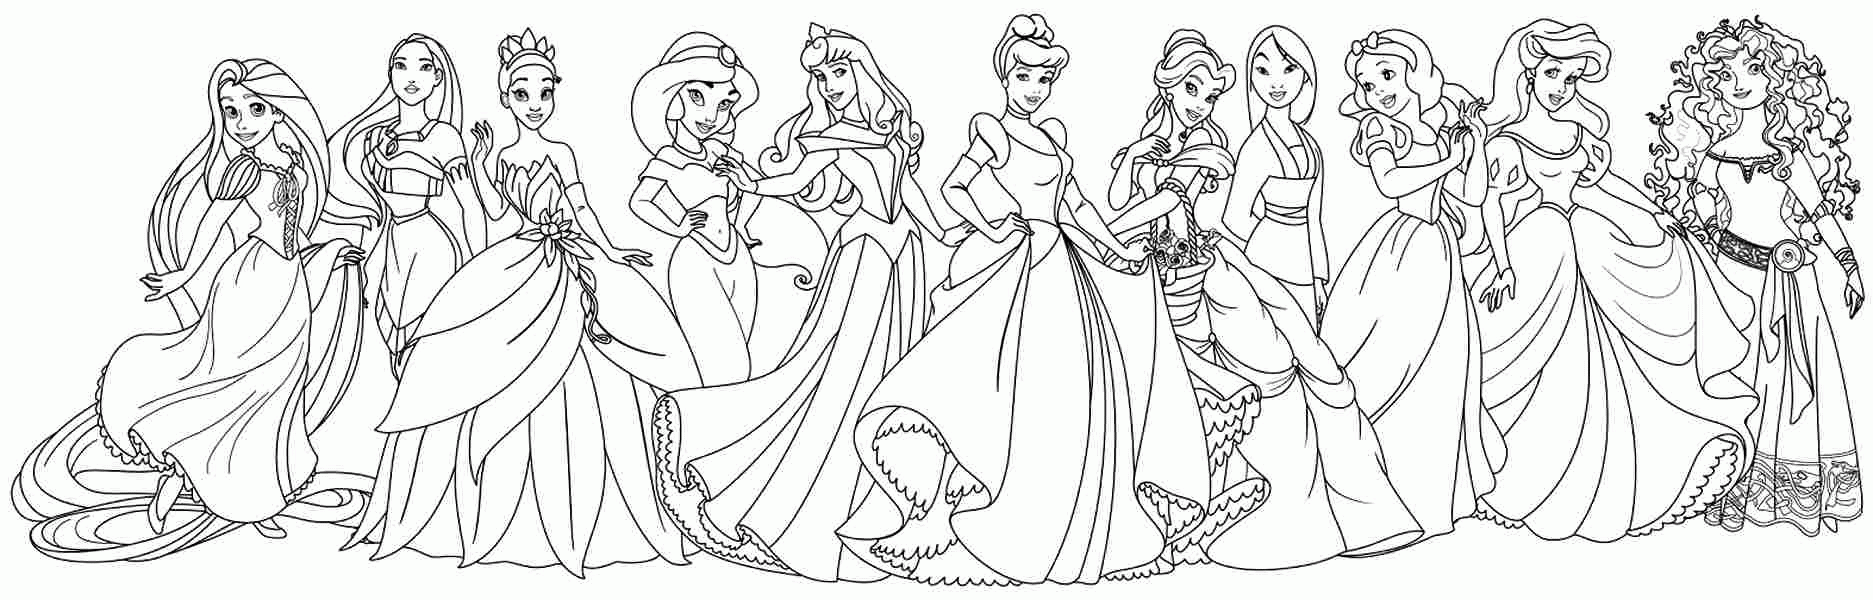 Free Printable Coloring Pages Disney Princesses Coloring Page Photos Coloring Home